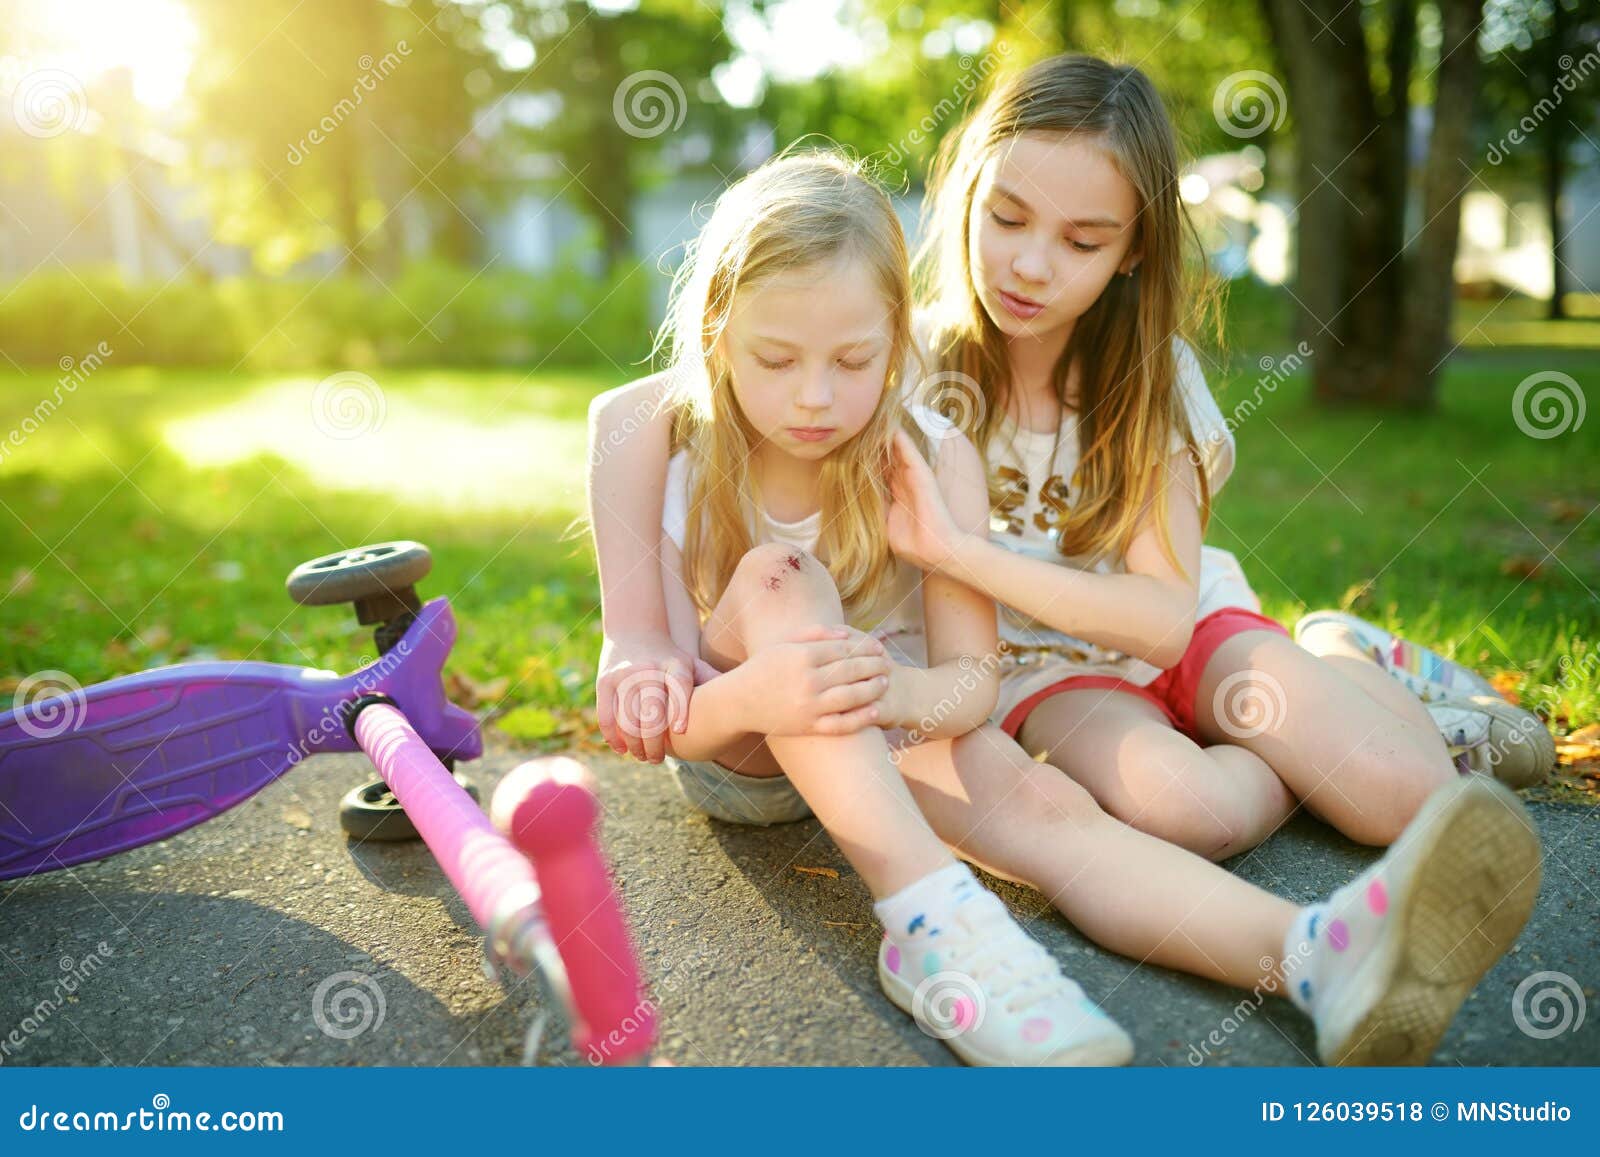 adorable girl comforting her little sister after she fell off her scooter at summer park. child getting hurt while riding a kick s